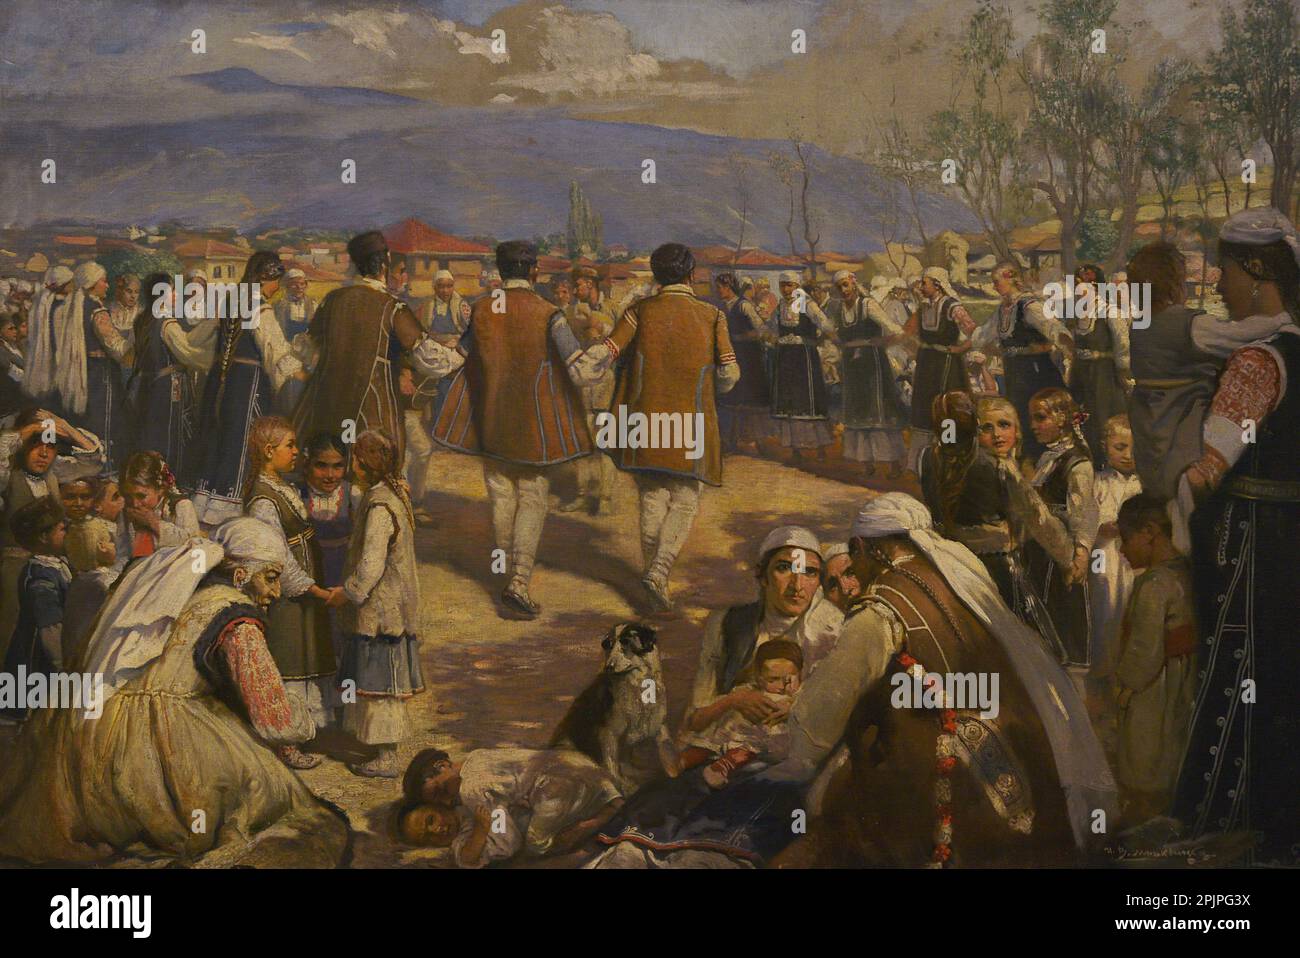 Ivan Mrkvicka (1856-1938). Czech painter. Round Dance (Shopsko horo), 1892. Participation of the Art Section of the Plovdiv Exposition, 1892. National Art Gallery. Sofia. Bulgaria. Stock Photo